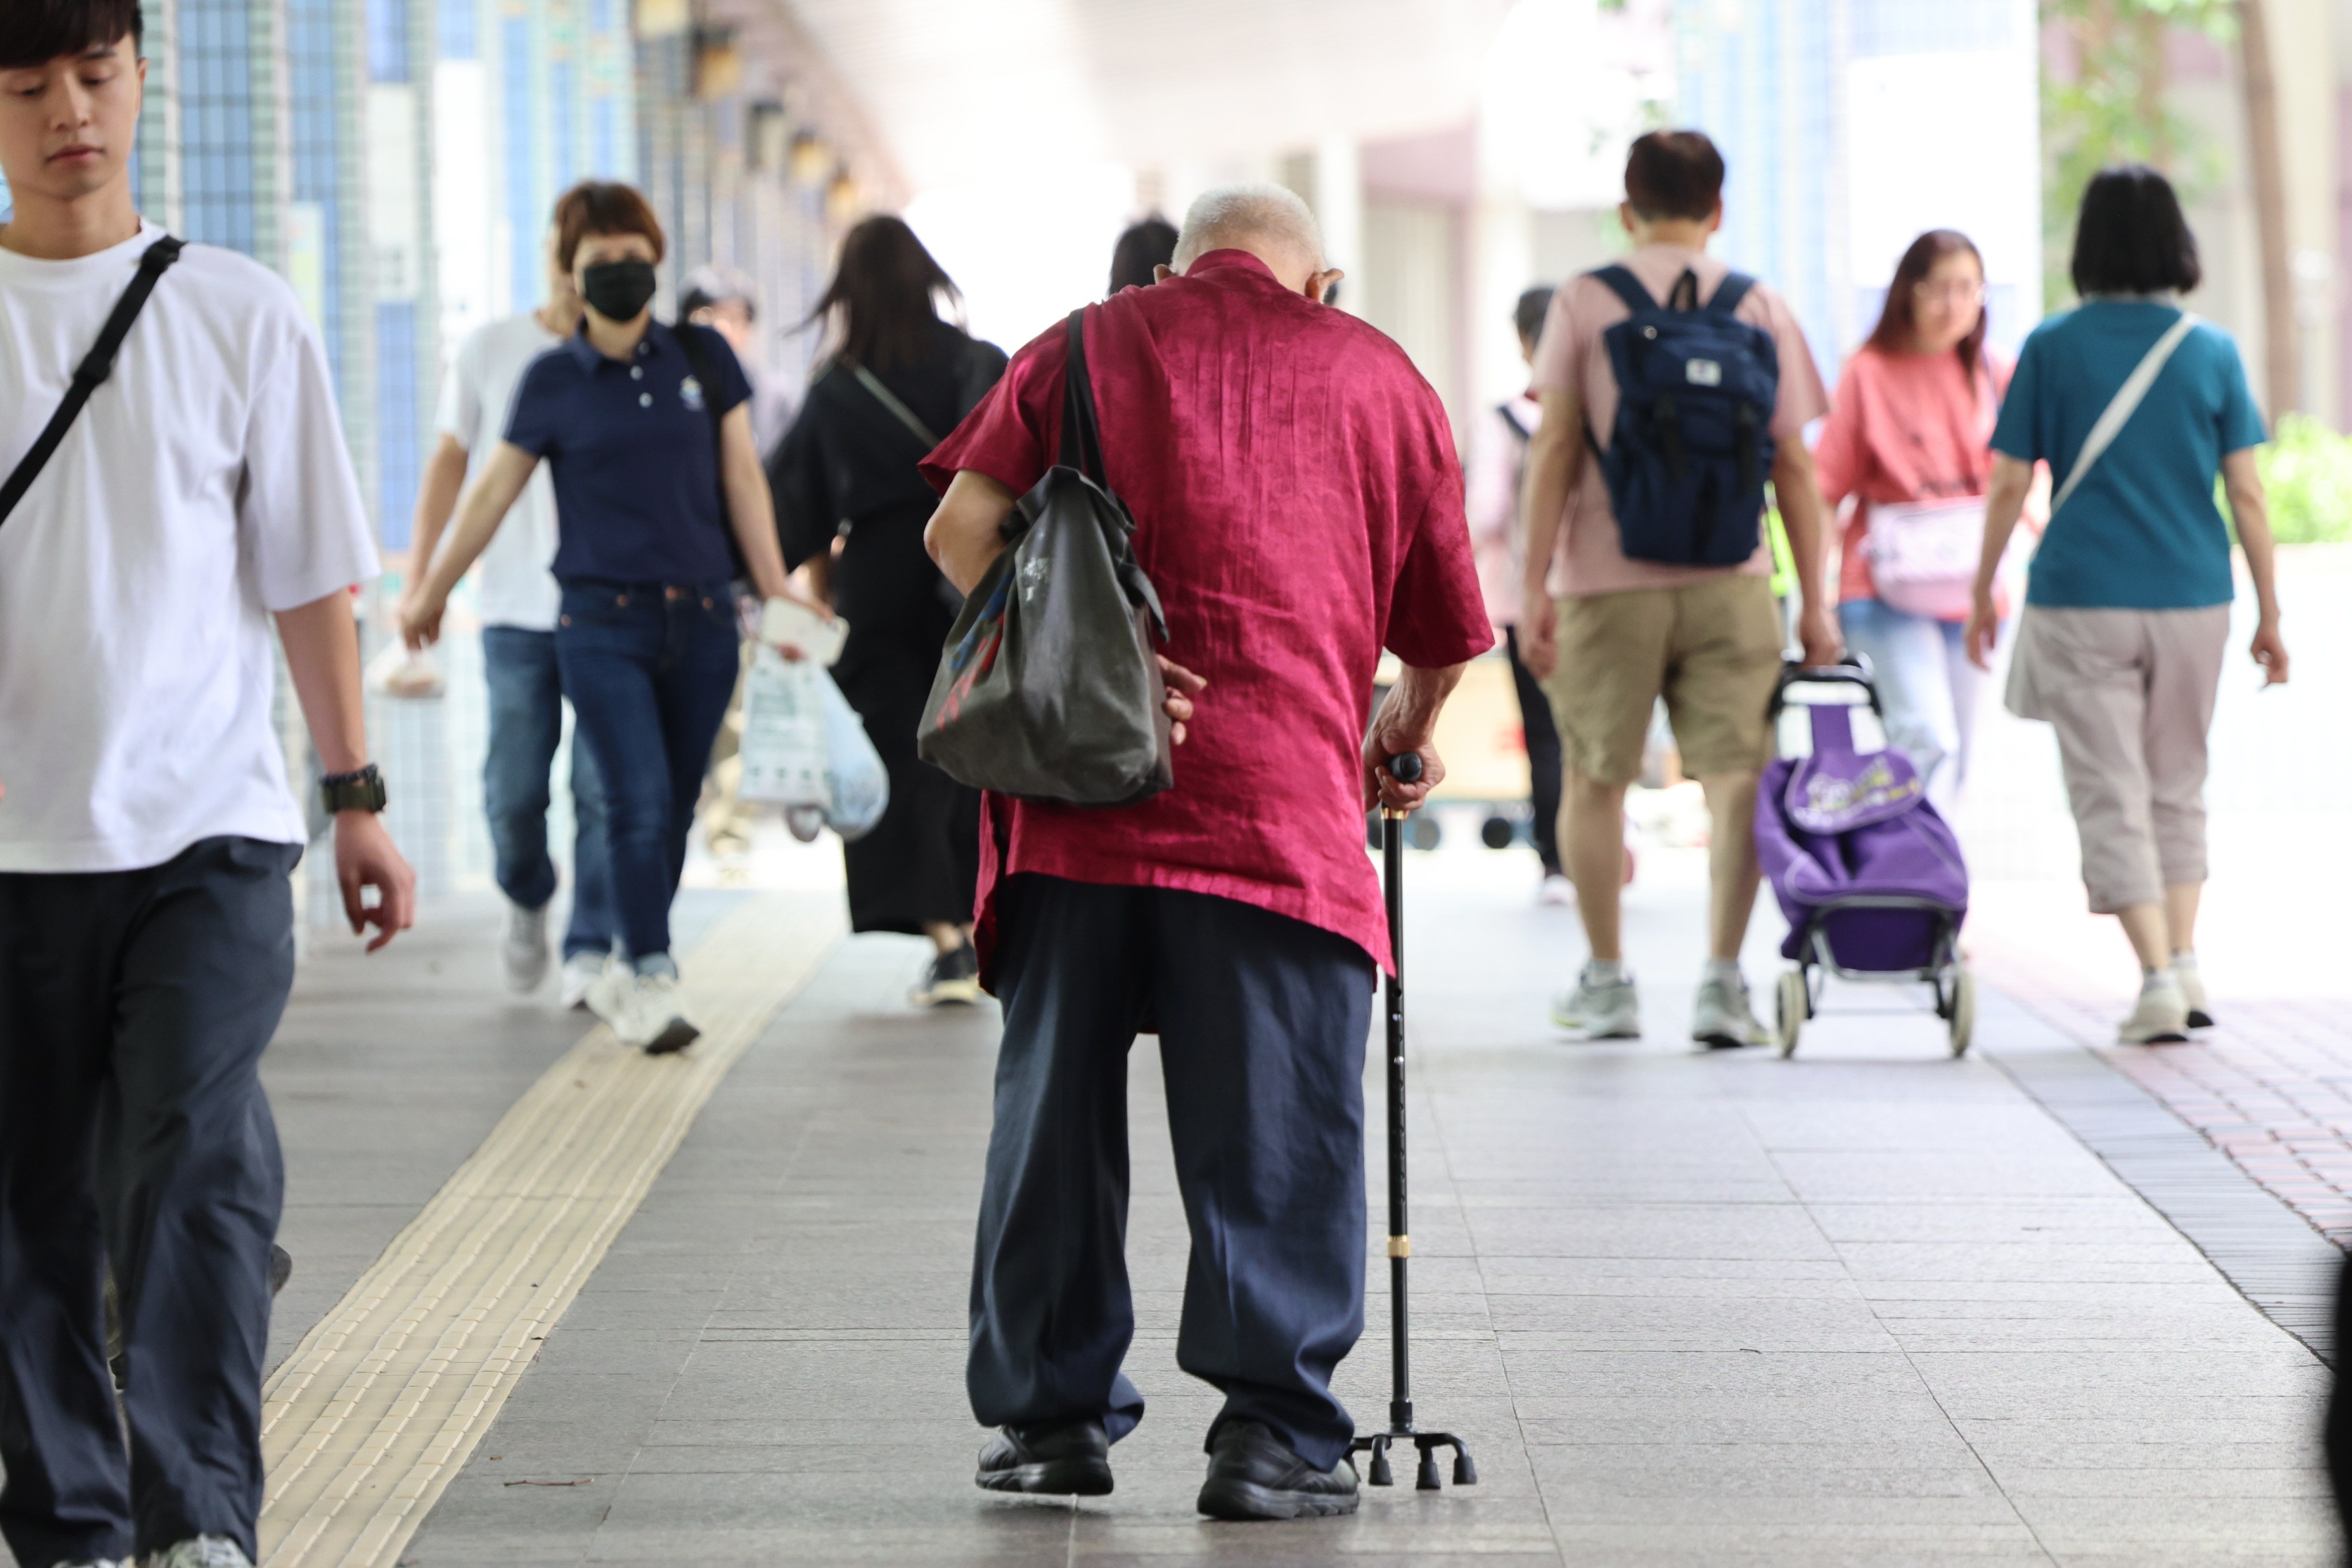 Experts have urged society to place greater importance on tackling the rising number of elderly people feeling lonely. Photo: Jelly Tse